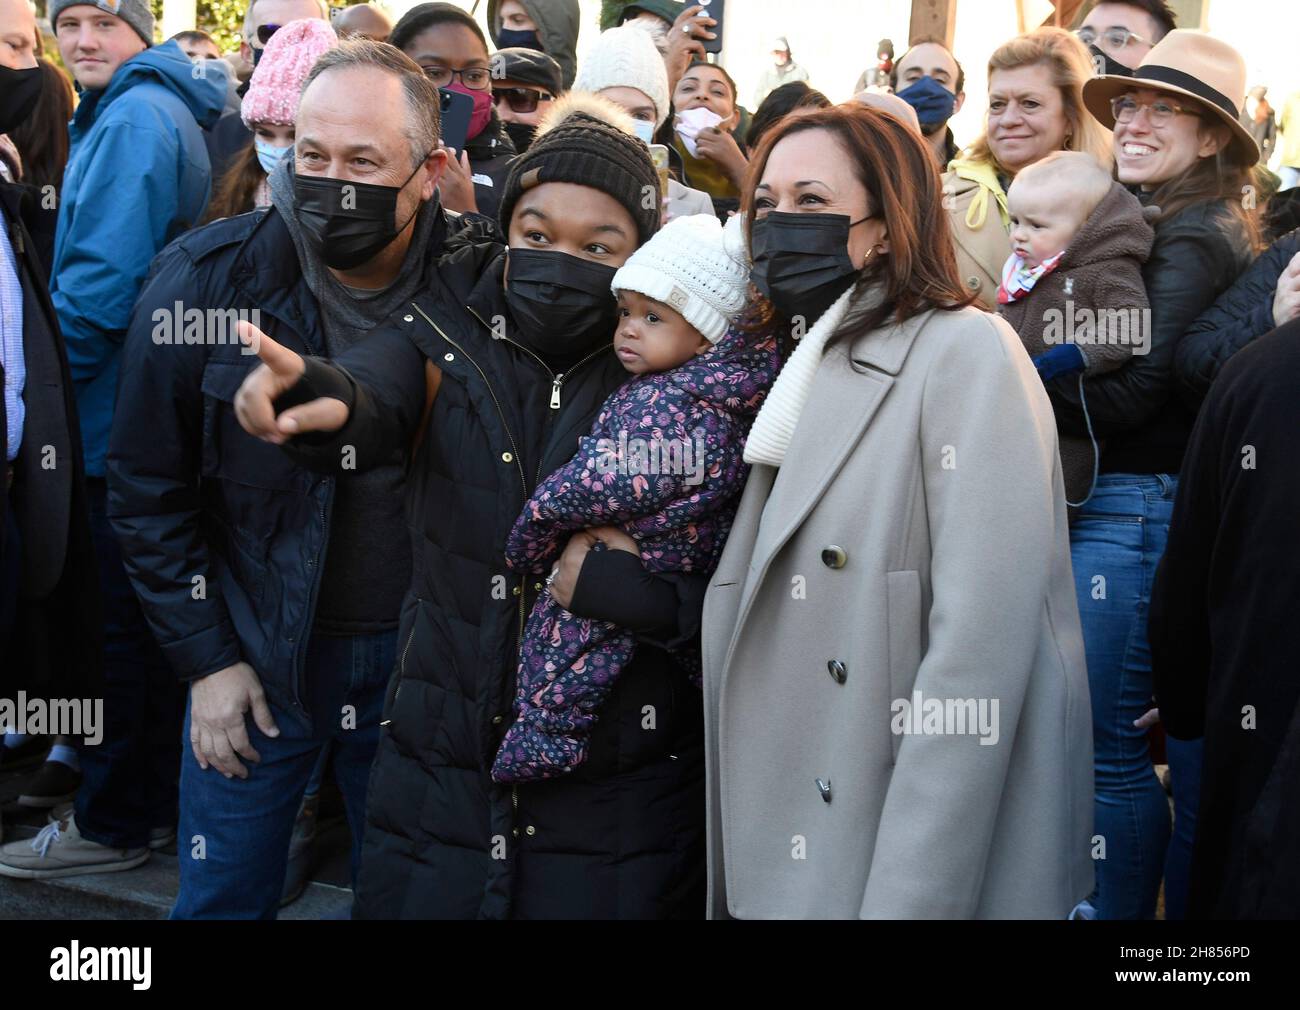 Washington, United States. 28th Nov, 2021. Vice President Kamala Harris (R) and Second Gentleman Douglas Emhoff (L) have their photo taken with shoppers as they support Small Business Saturday with a visit to an outdoor Christmas market, Saturday, November 27, 2021, in Washington, DC. ISP POOL PHOTO via Mike Theiler/Pool/Sipa USA Credit: Sipa USA/Alamy Live News Stock Photo